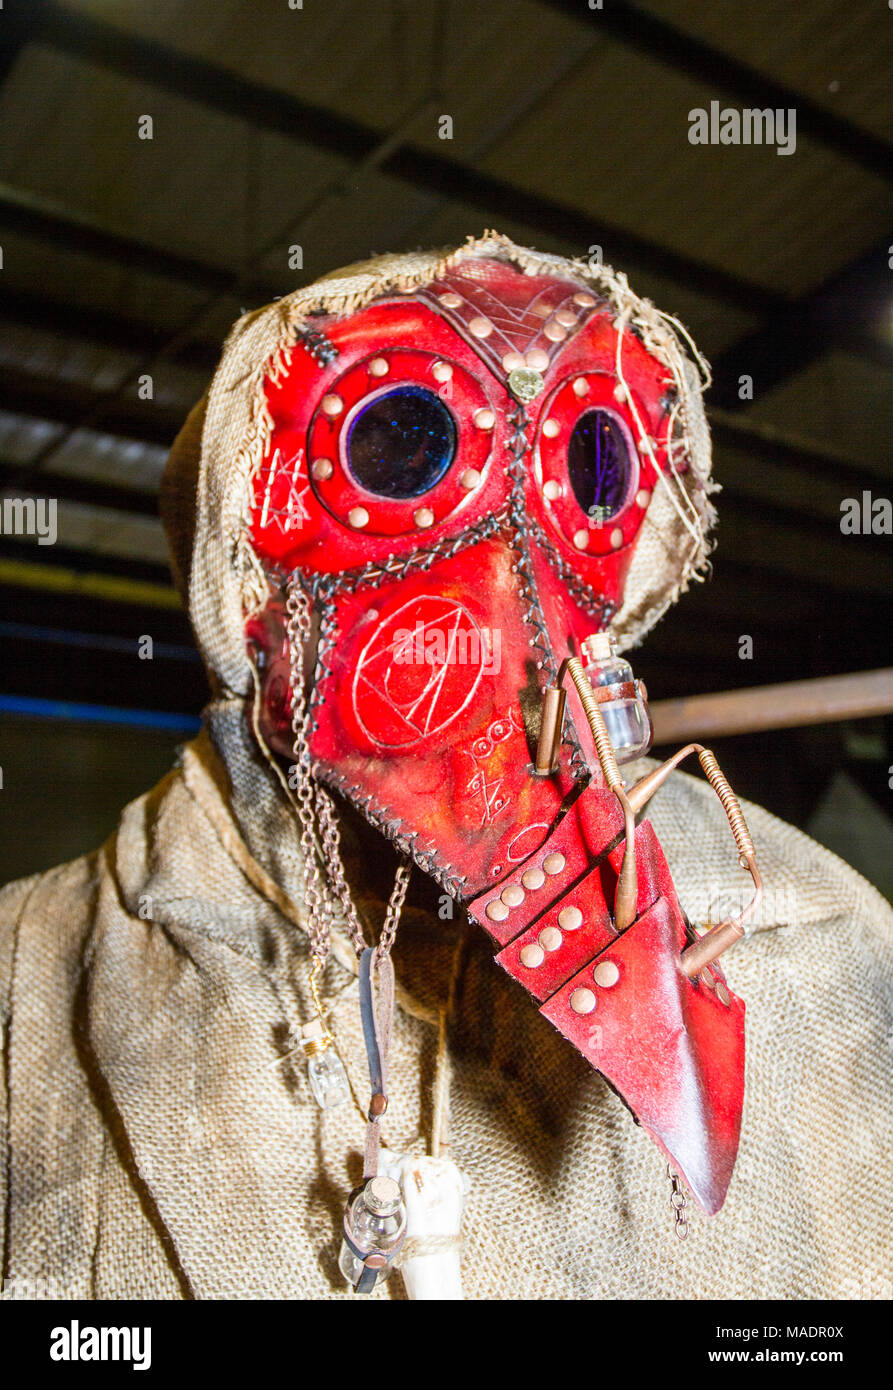 Red plague doctor face mask, steampunk sub culture post apocalypse apocalyptic spyglas goth crossover machine machinery costume fancy dress up gothic Stock Photo